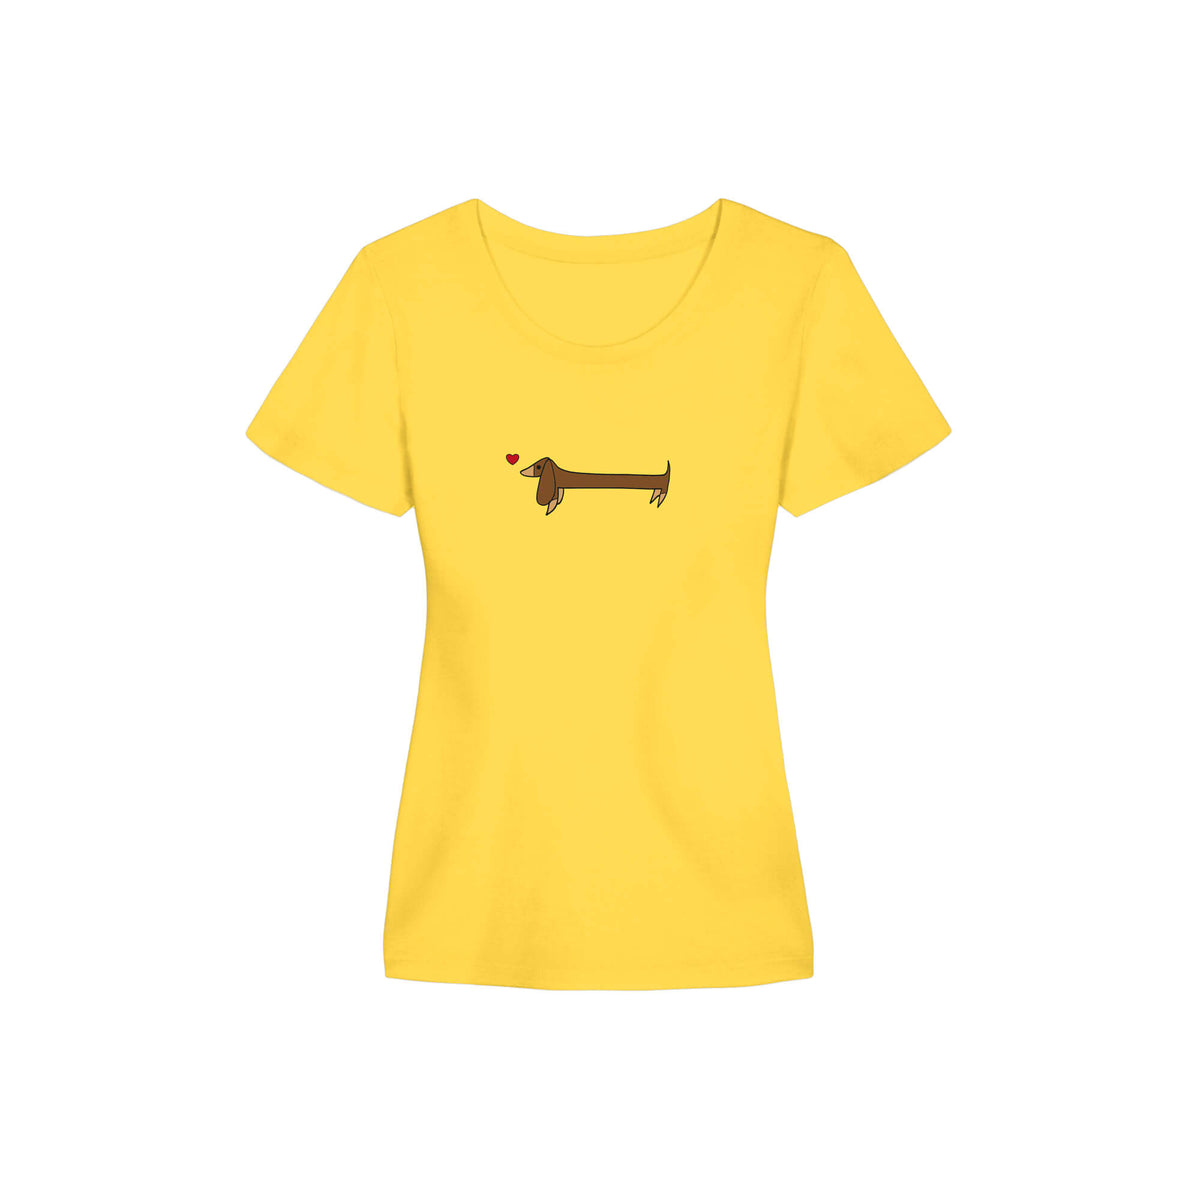 Honey illustrated fitted t-shirt. Janey Godley.Yellow.